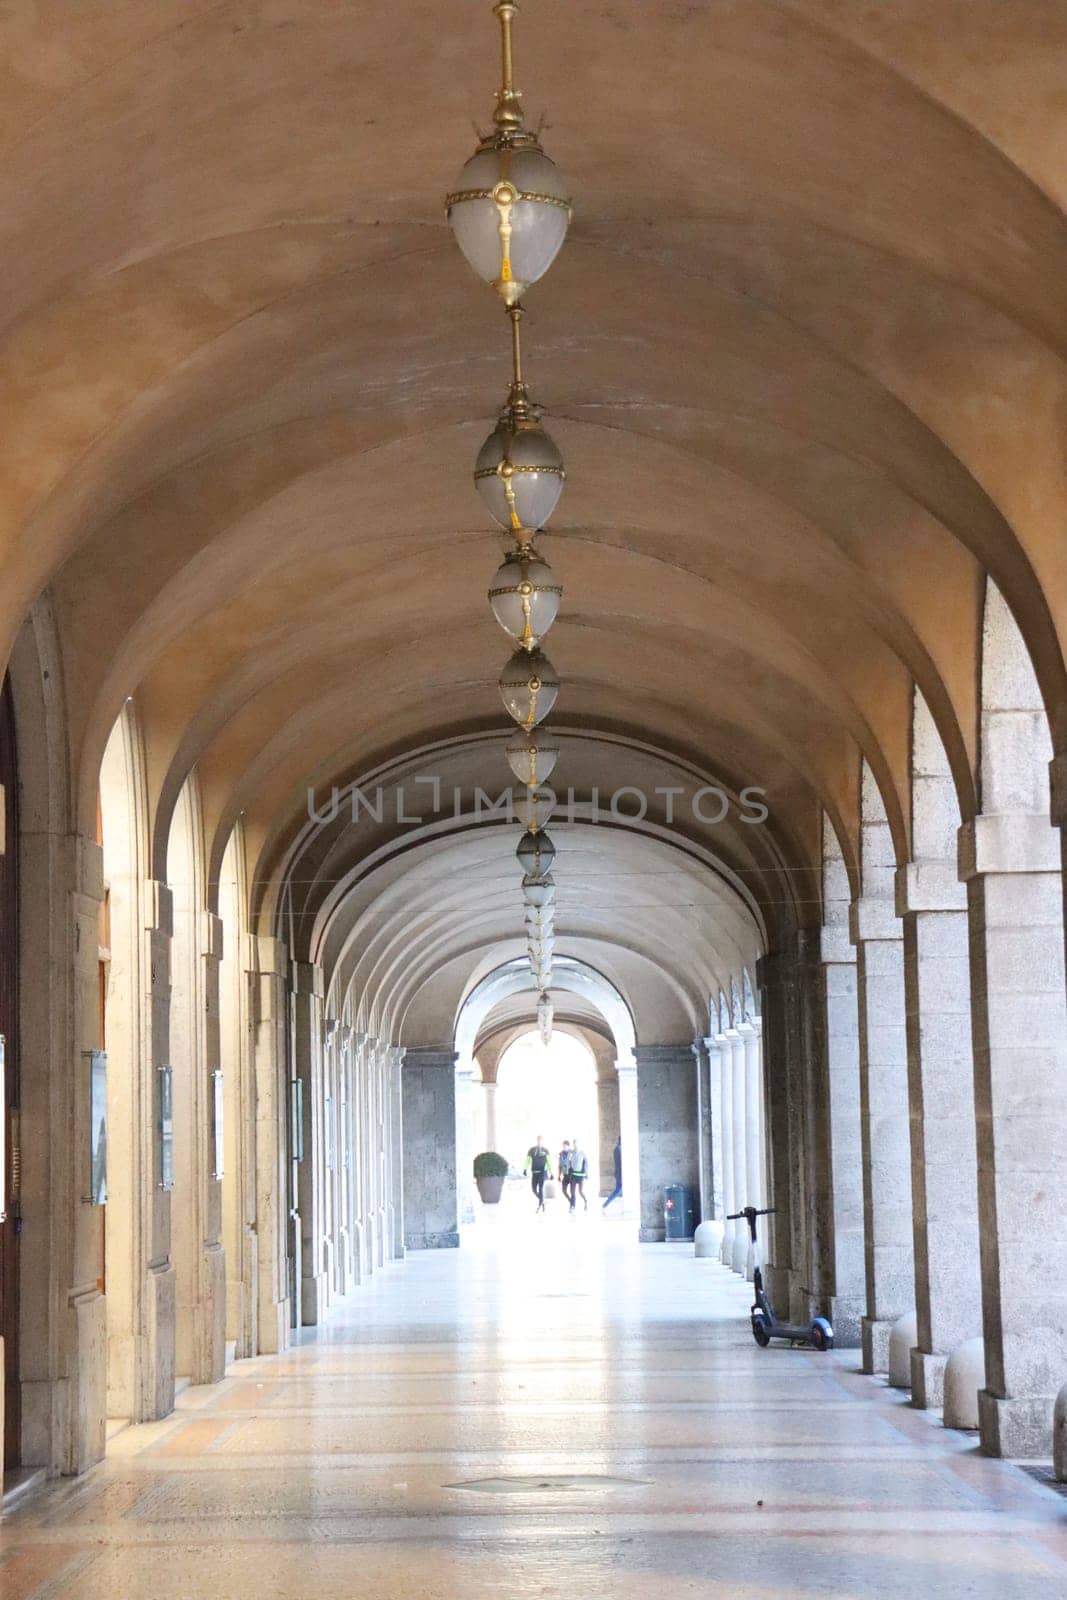 The arched yellow stone colonnade with lanterns concept photo. Urban architectural photography. High quality picture